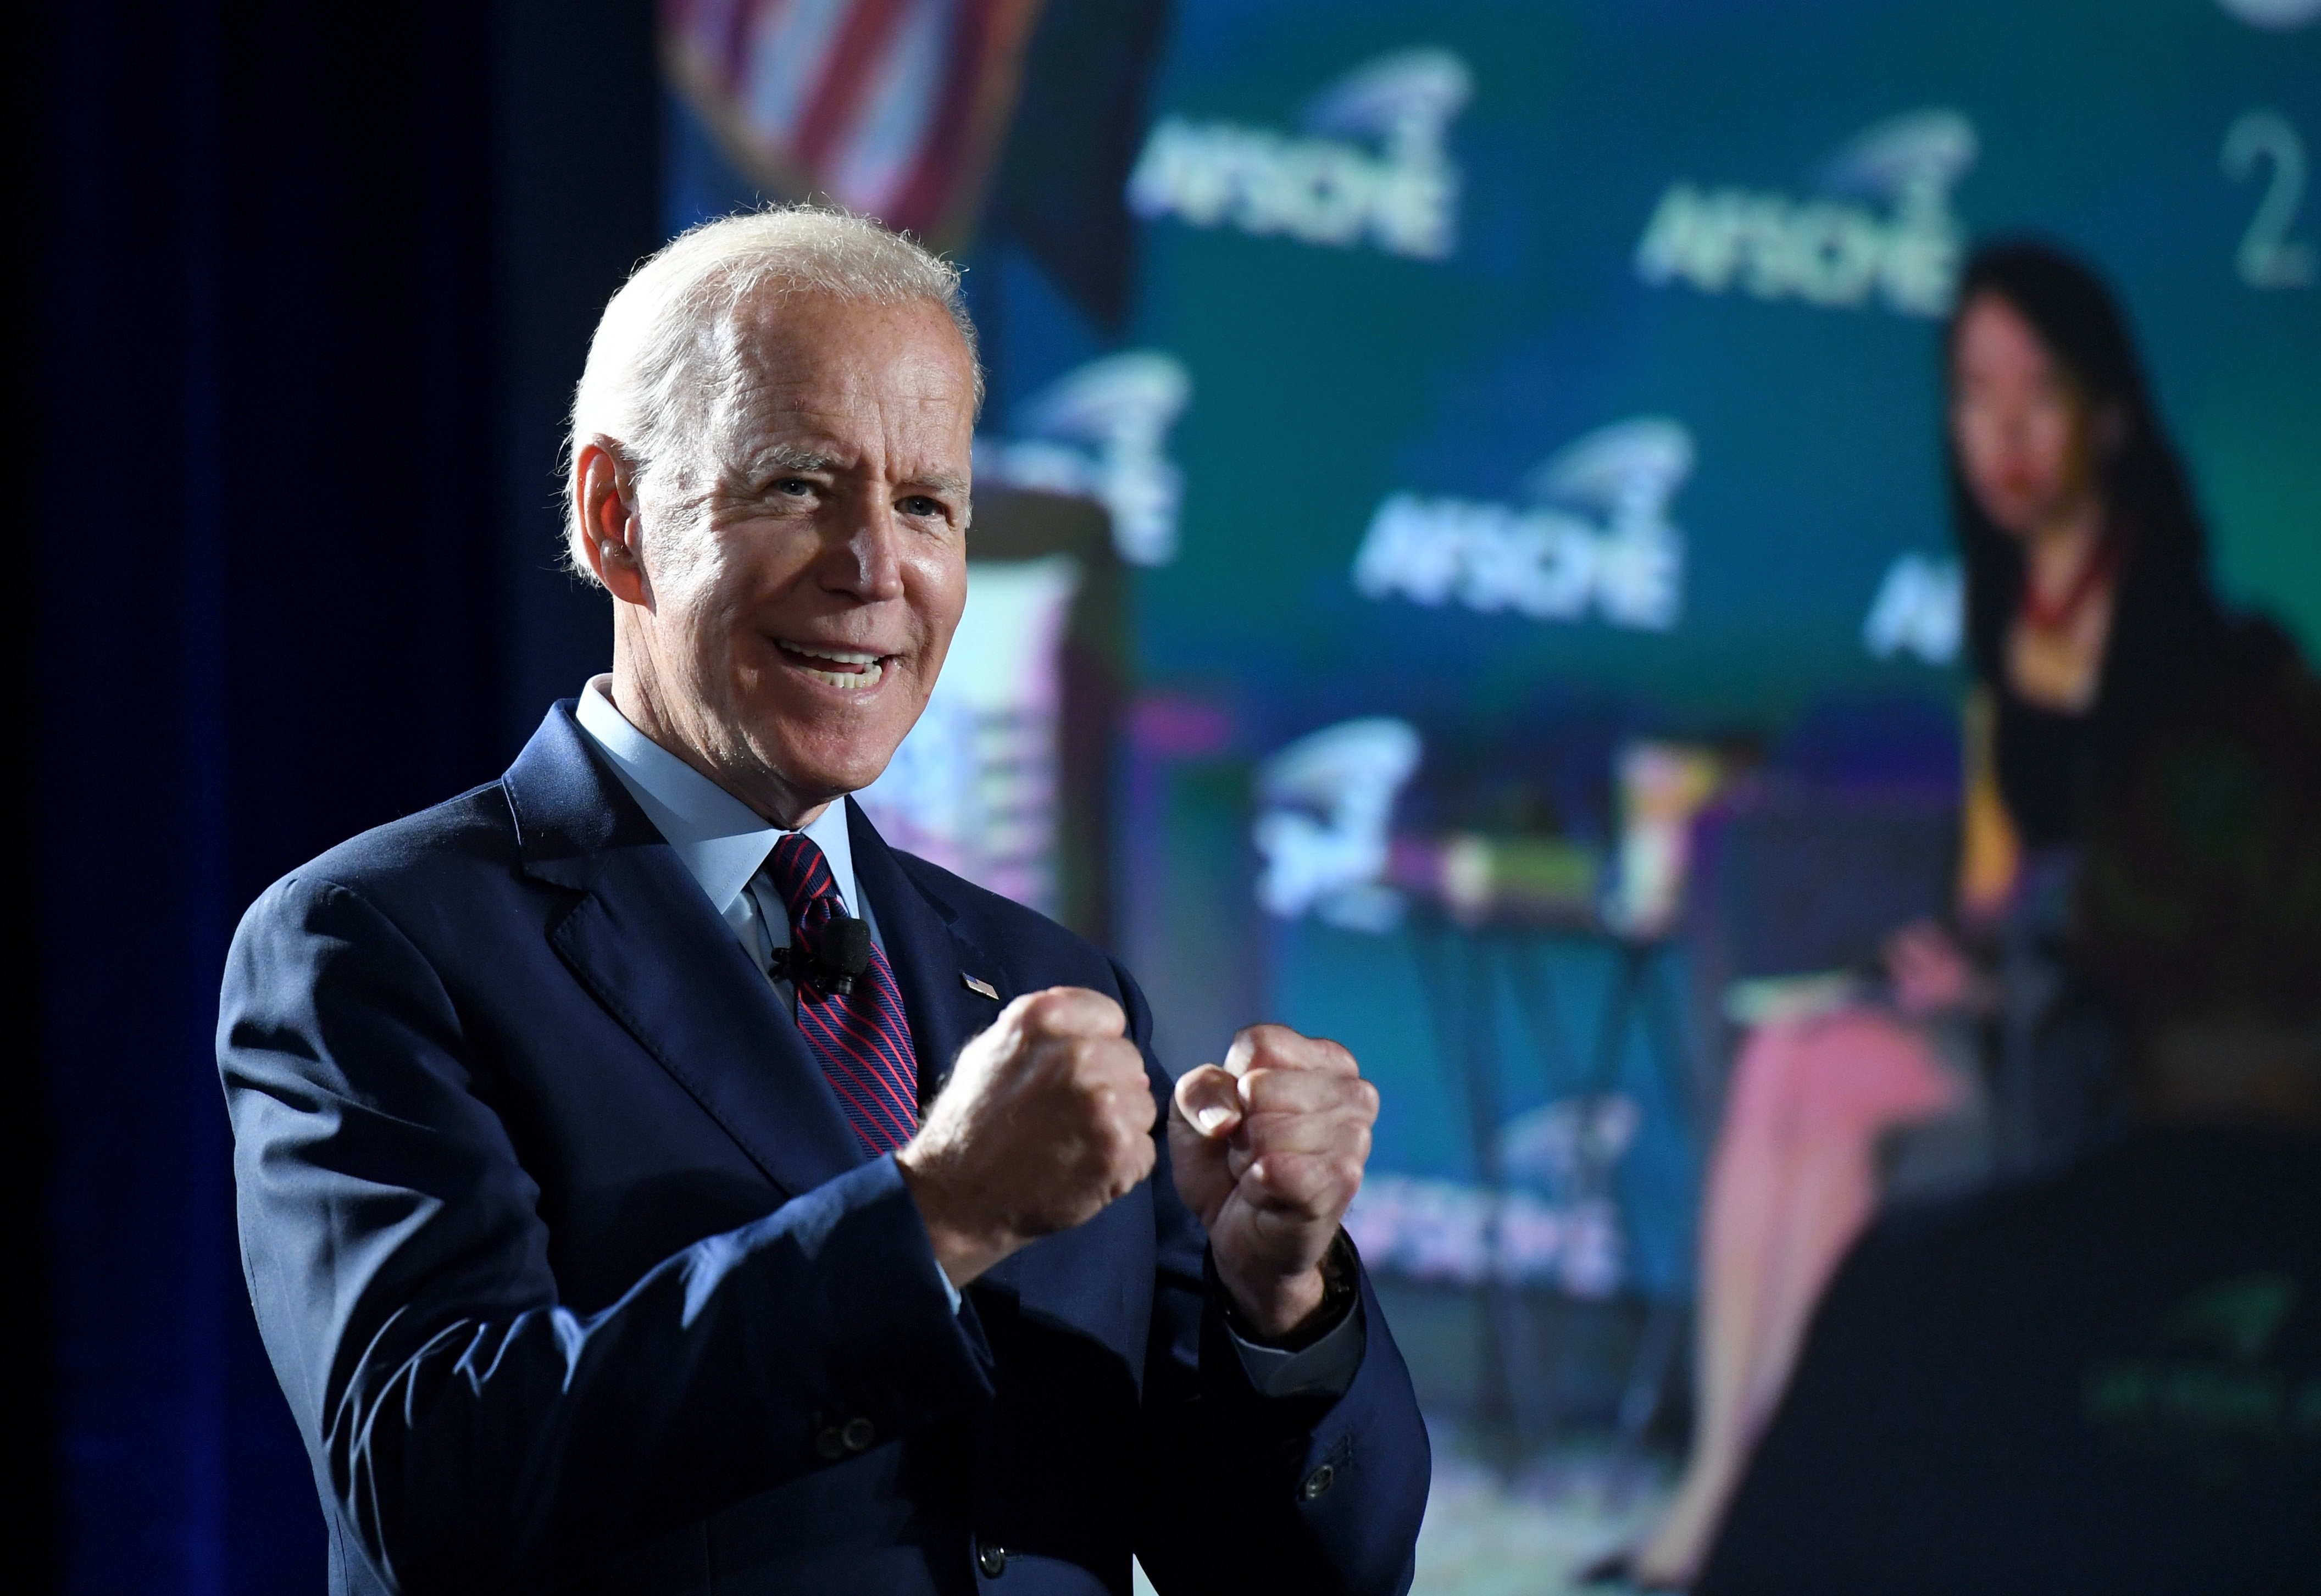 LAS VEGAS, NEVADA - AUGUST 03: Democratic presidential candidate and former U.S. Vice President Joe Biden speaks during the 2020 Public Service Forum hosted by the American Federation of State, County and Municipal Employees (AFSCME) at UNLV on August 3, 2019 in Las Vegas, Nevada. Nineteen of the 24 candidates running for the Democratic party's 2020 presidential nomination are addressing union members in a state with one of the largest organized labor populations in the United States. (Photo by Ethan Miller/Getty Images)